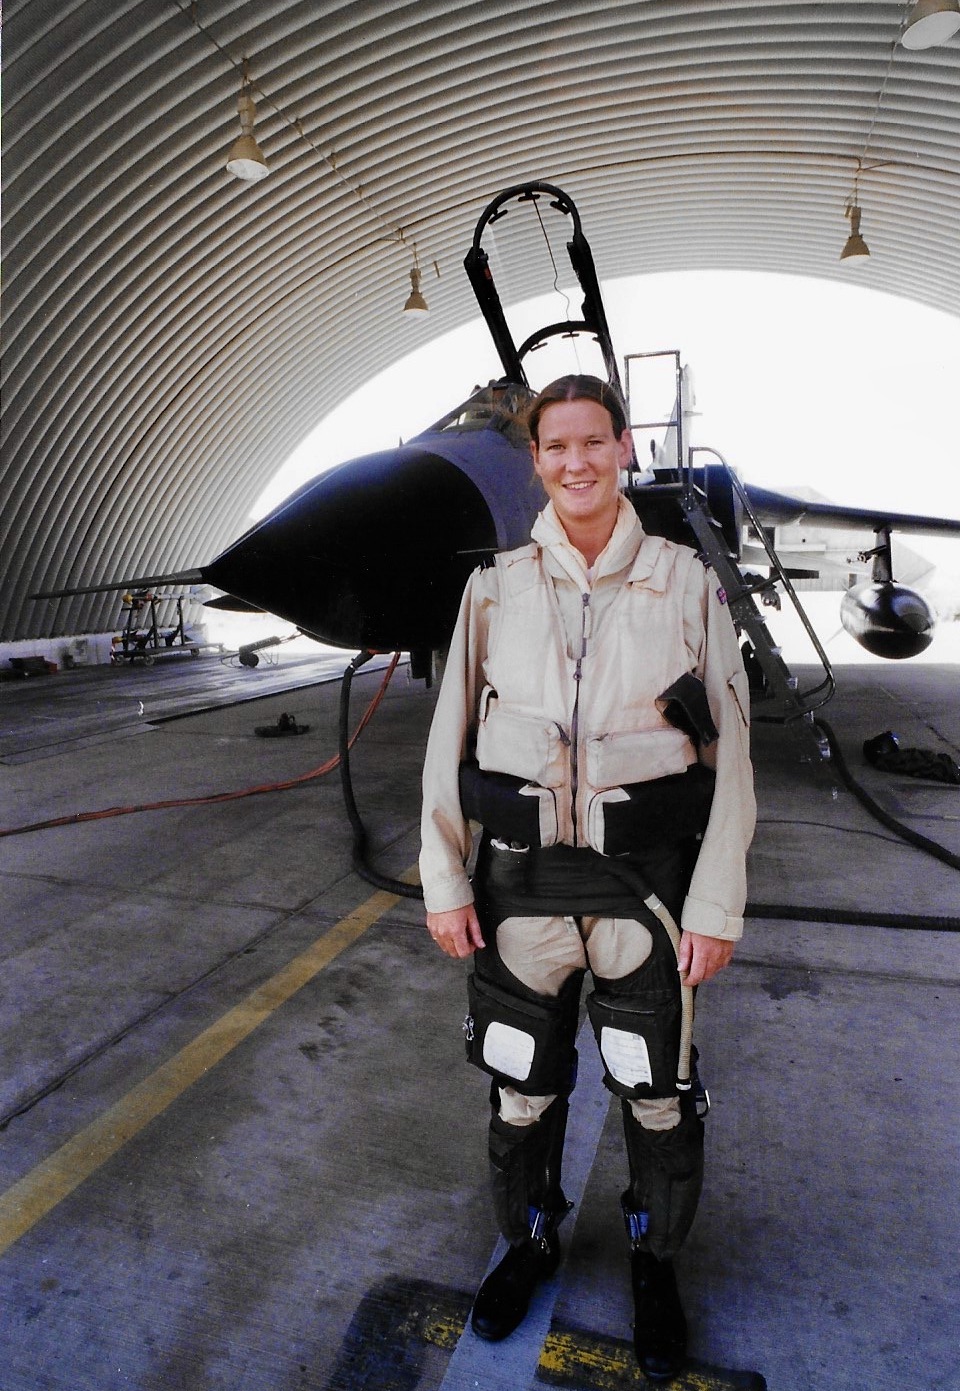 Meet Tornado Pilot Mandy Hickson, Who Executed A Perfect Maneuver To Survive A Missile 1